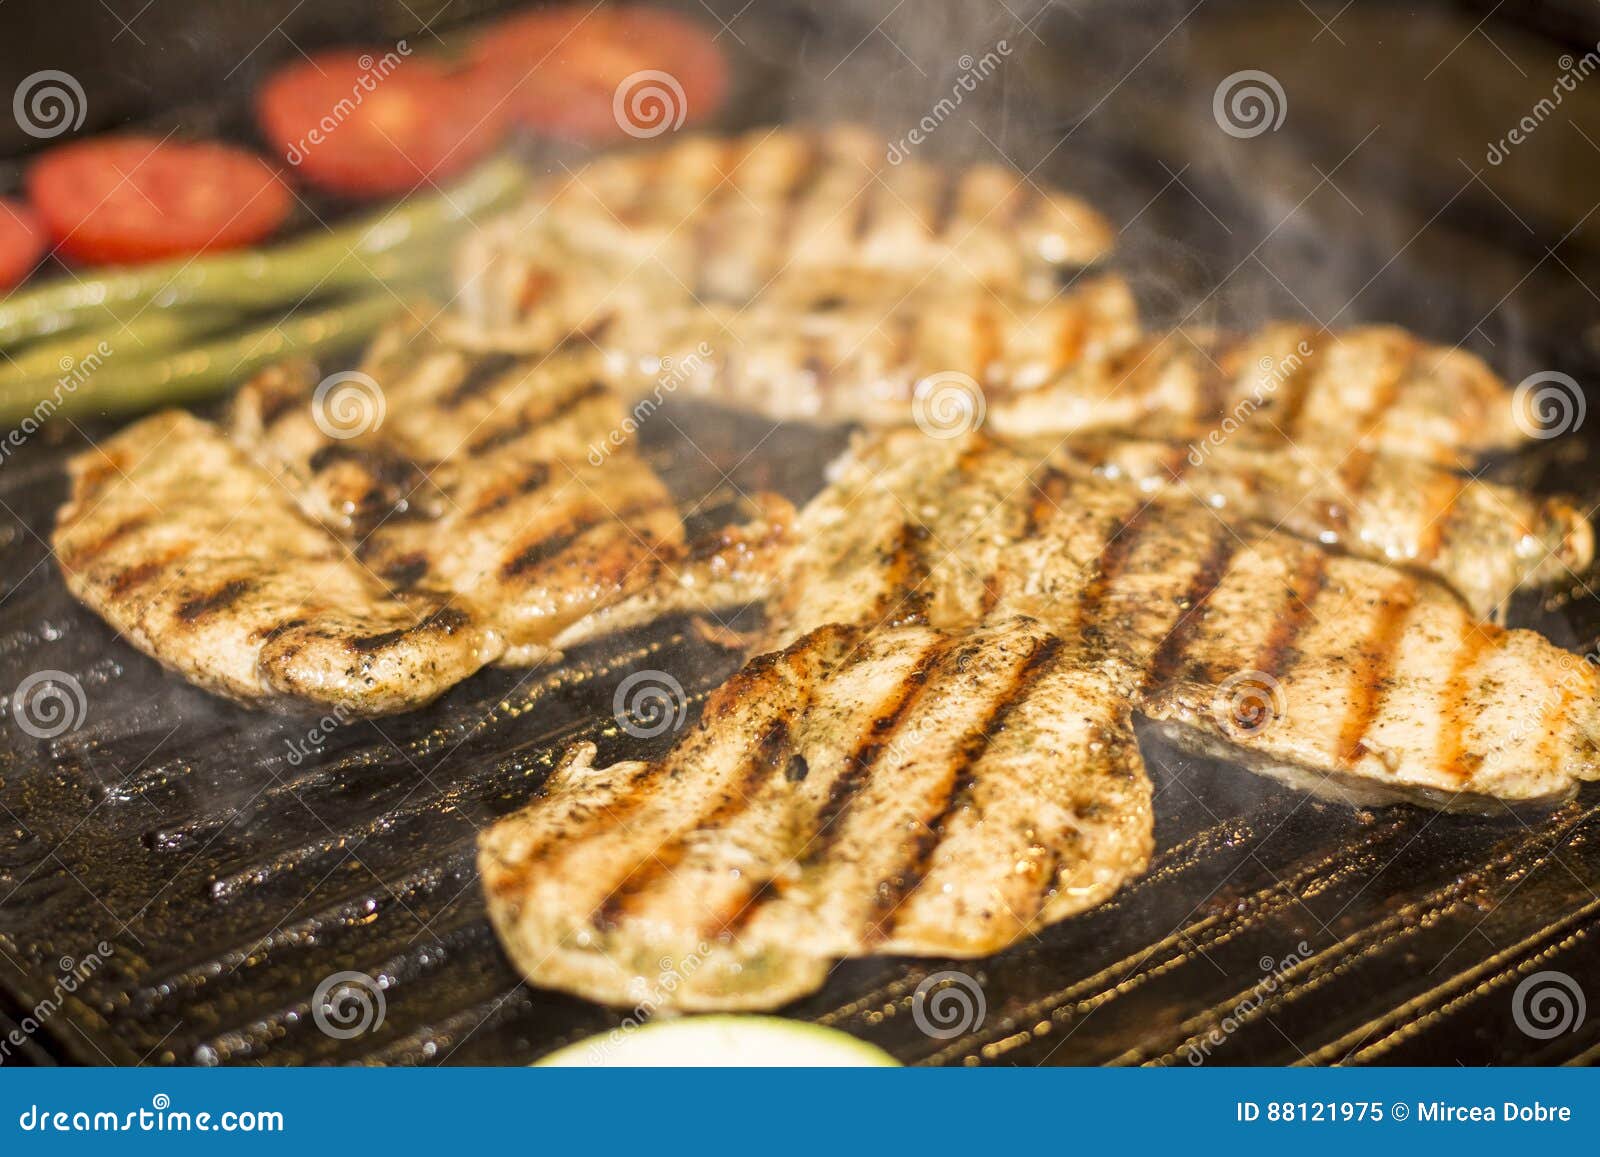 grilled chicken breast with sausage, fries and salad on grill